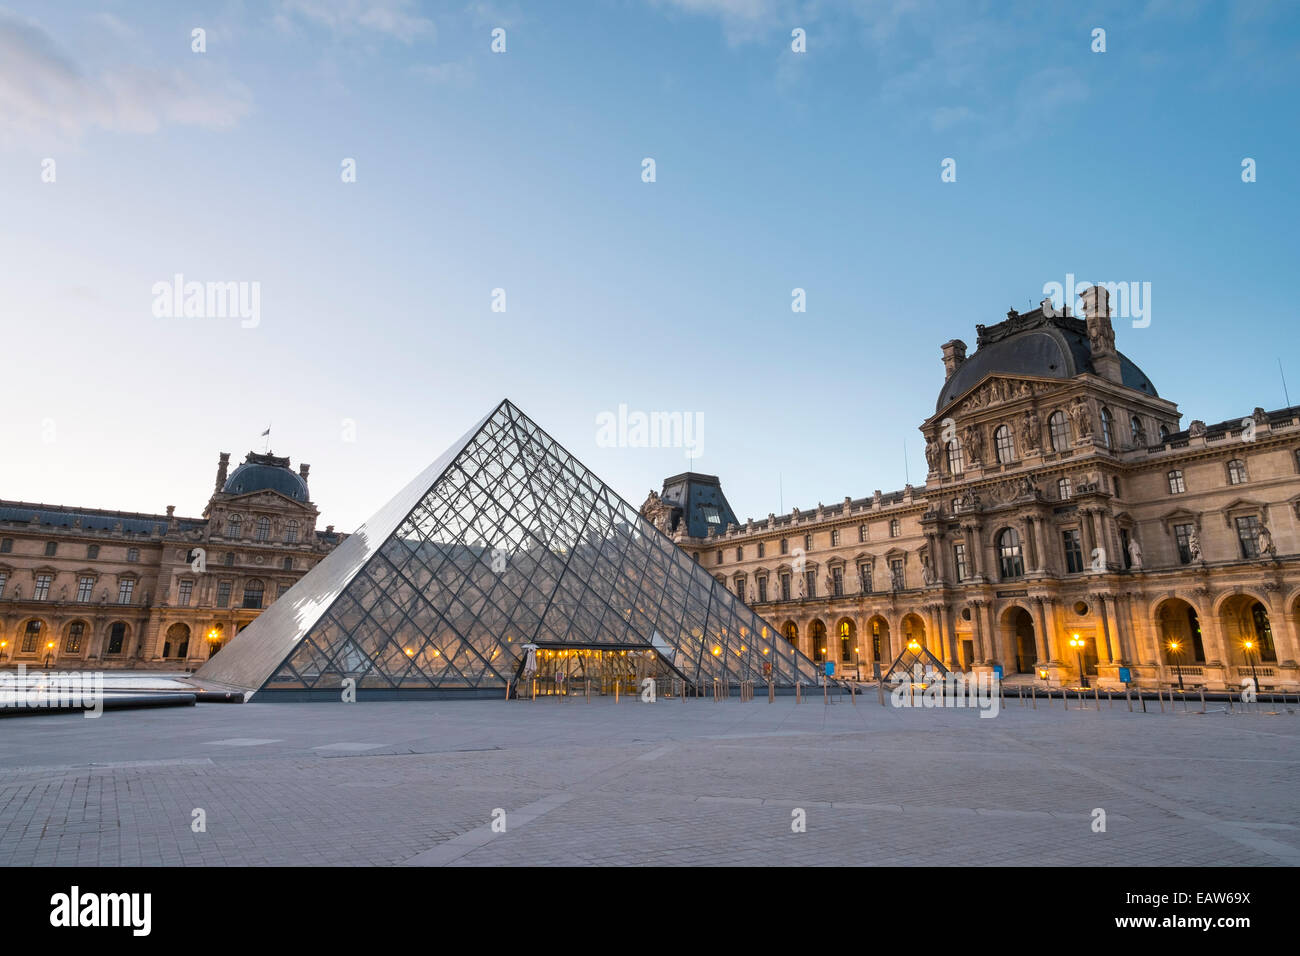 Courtyard and glass pyramid of the Louvre Museum at sunrise, Paris, √ésle-de-France, France Stock Photo